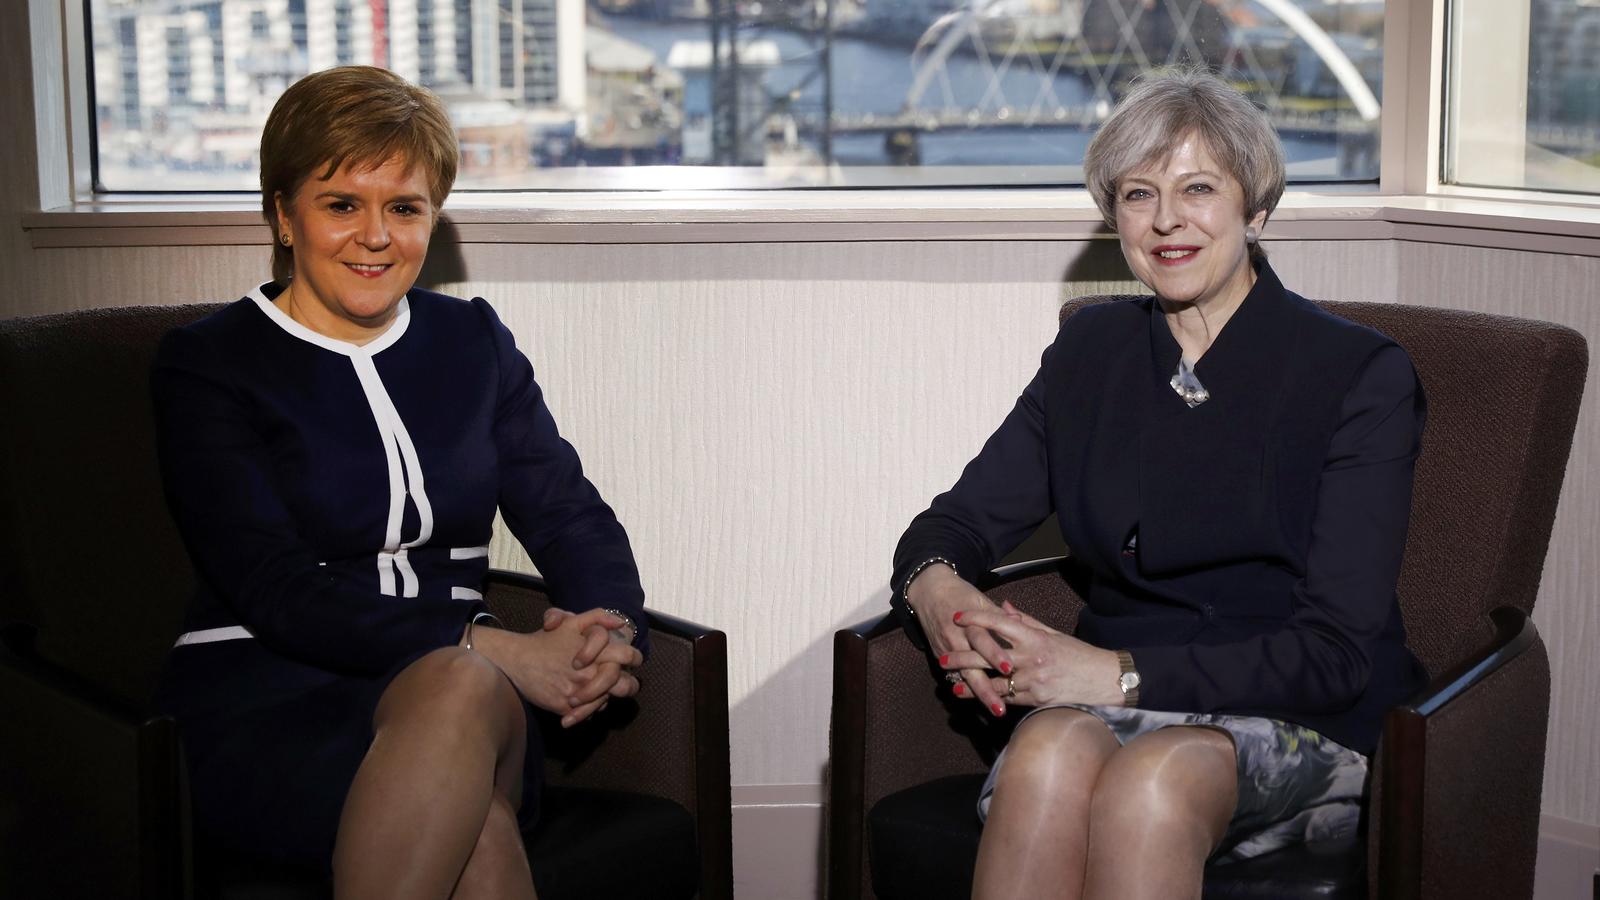 Britain's Prime Minister Theresa May and Scotland's First Minister Nicola Sturgeon meet in a hotel in Glasgow, Scotland, March 27, 2017. REUTERS/Russell Cheyne   